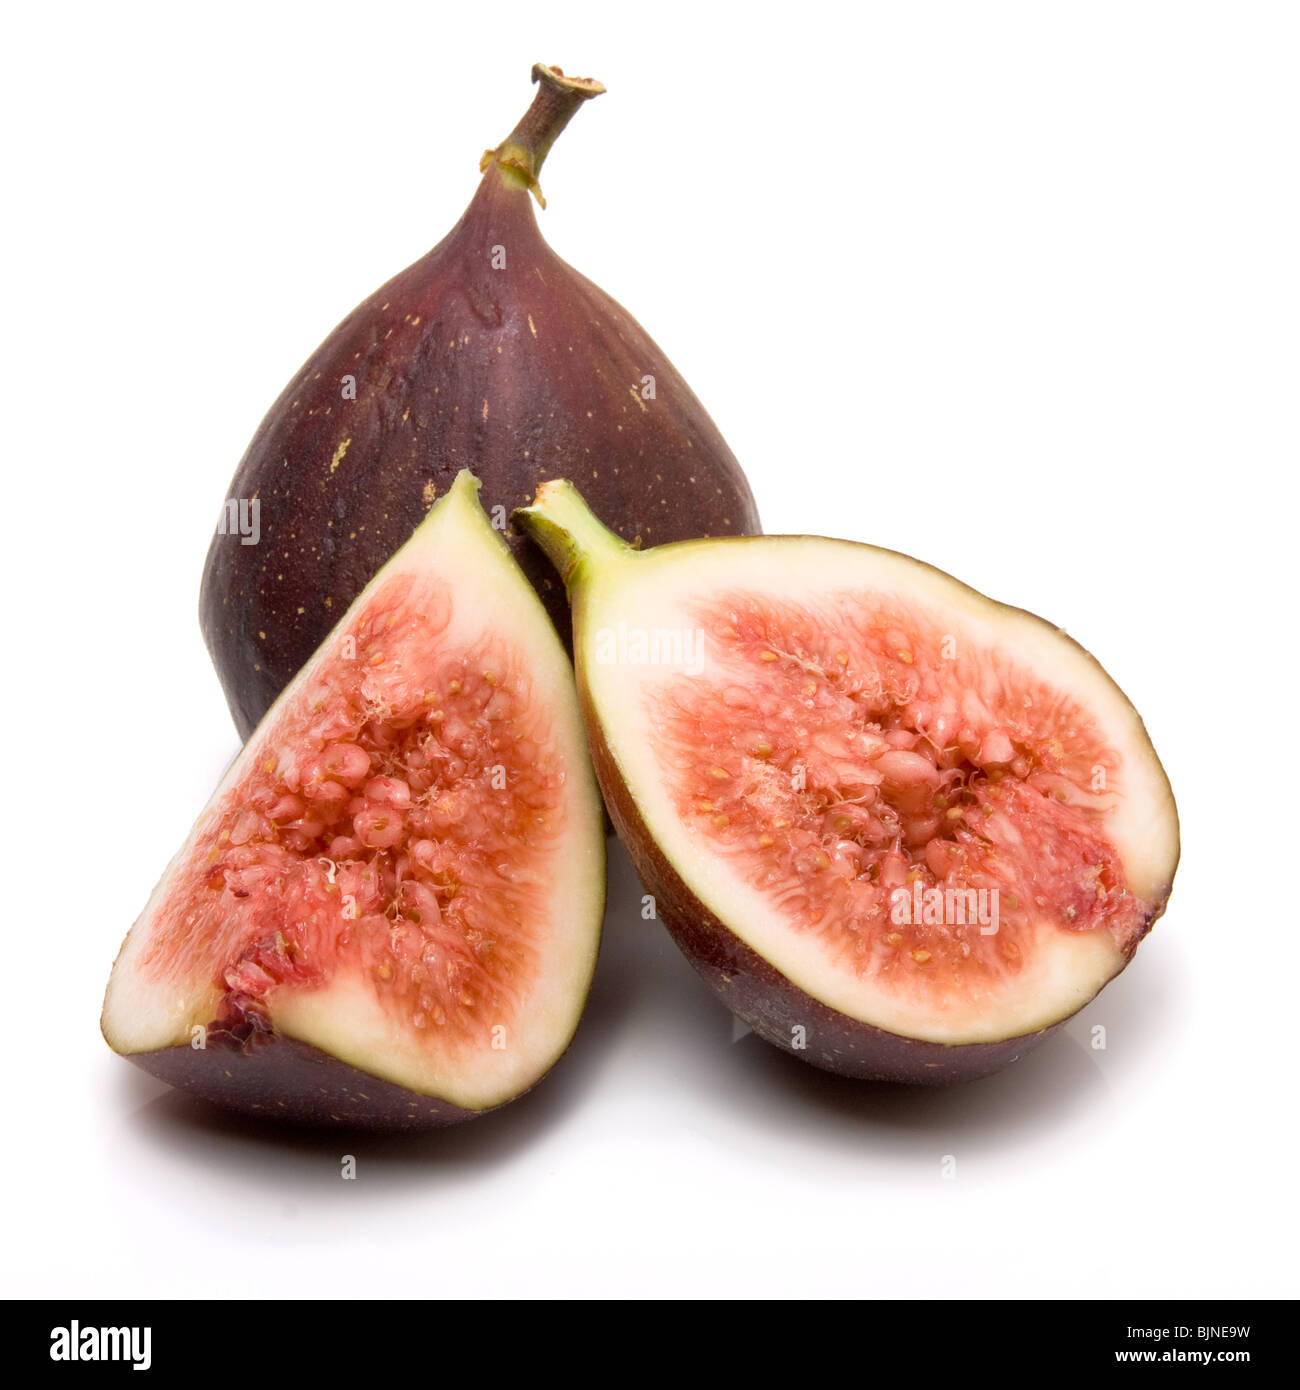 Sliced ripe figs from low viewpoint isolated against white background. Stock Photo